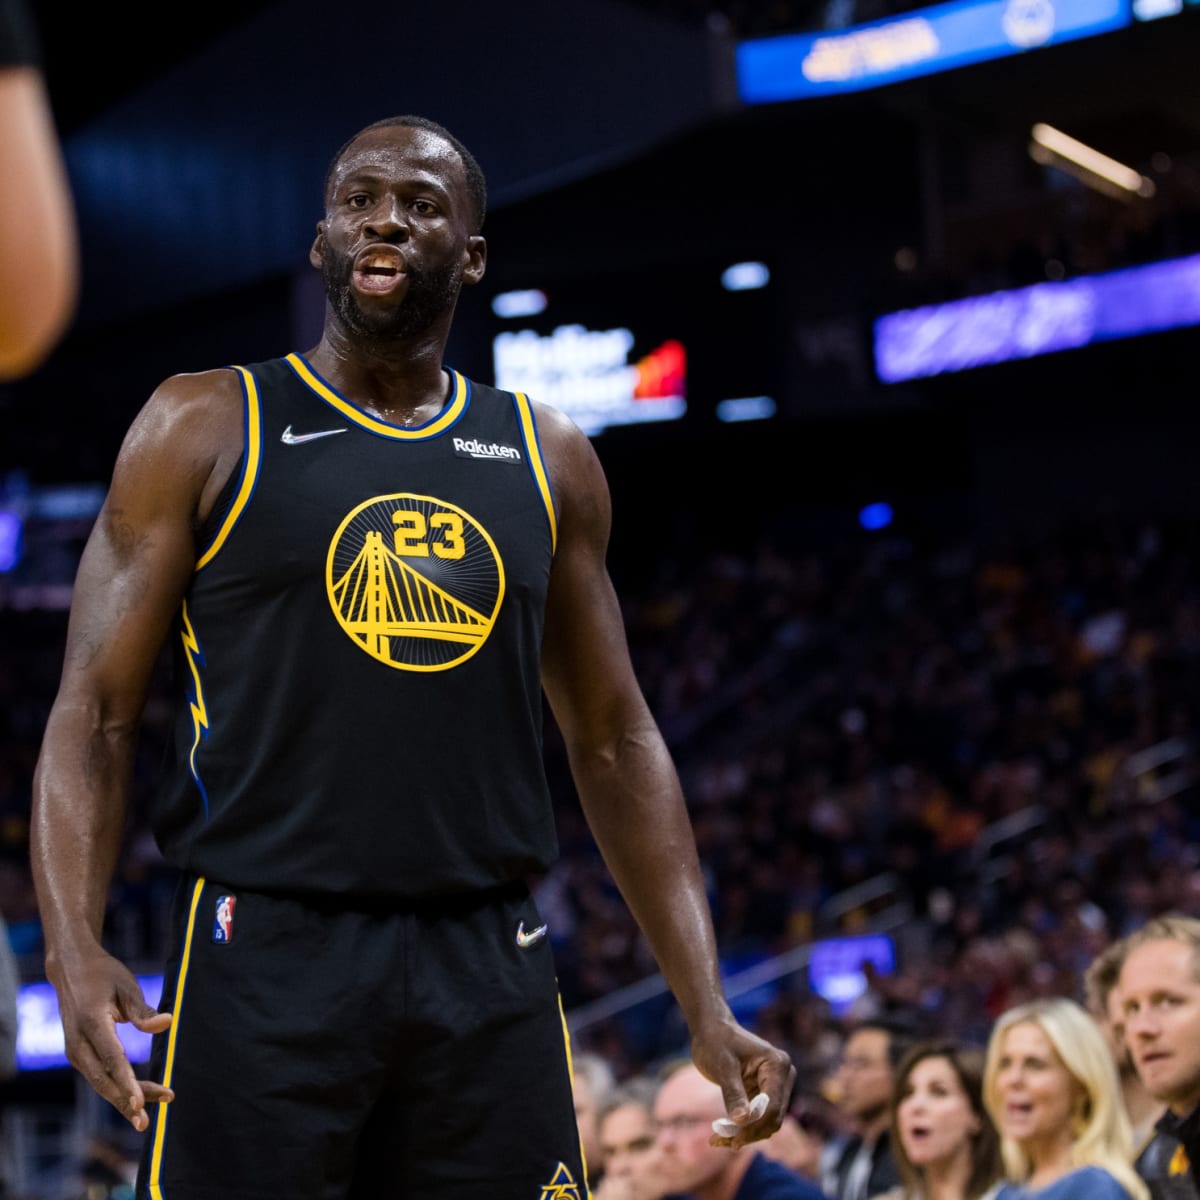 Draymond Green * - NBA Finals - Hooded Warmup Jacket - Photo-Matched to  Game 3